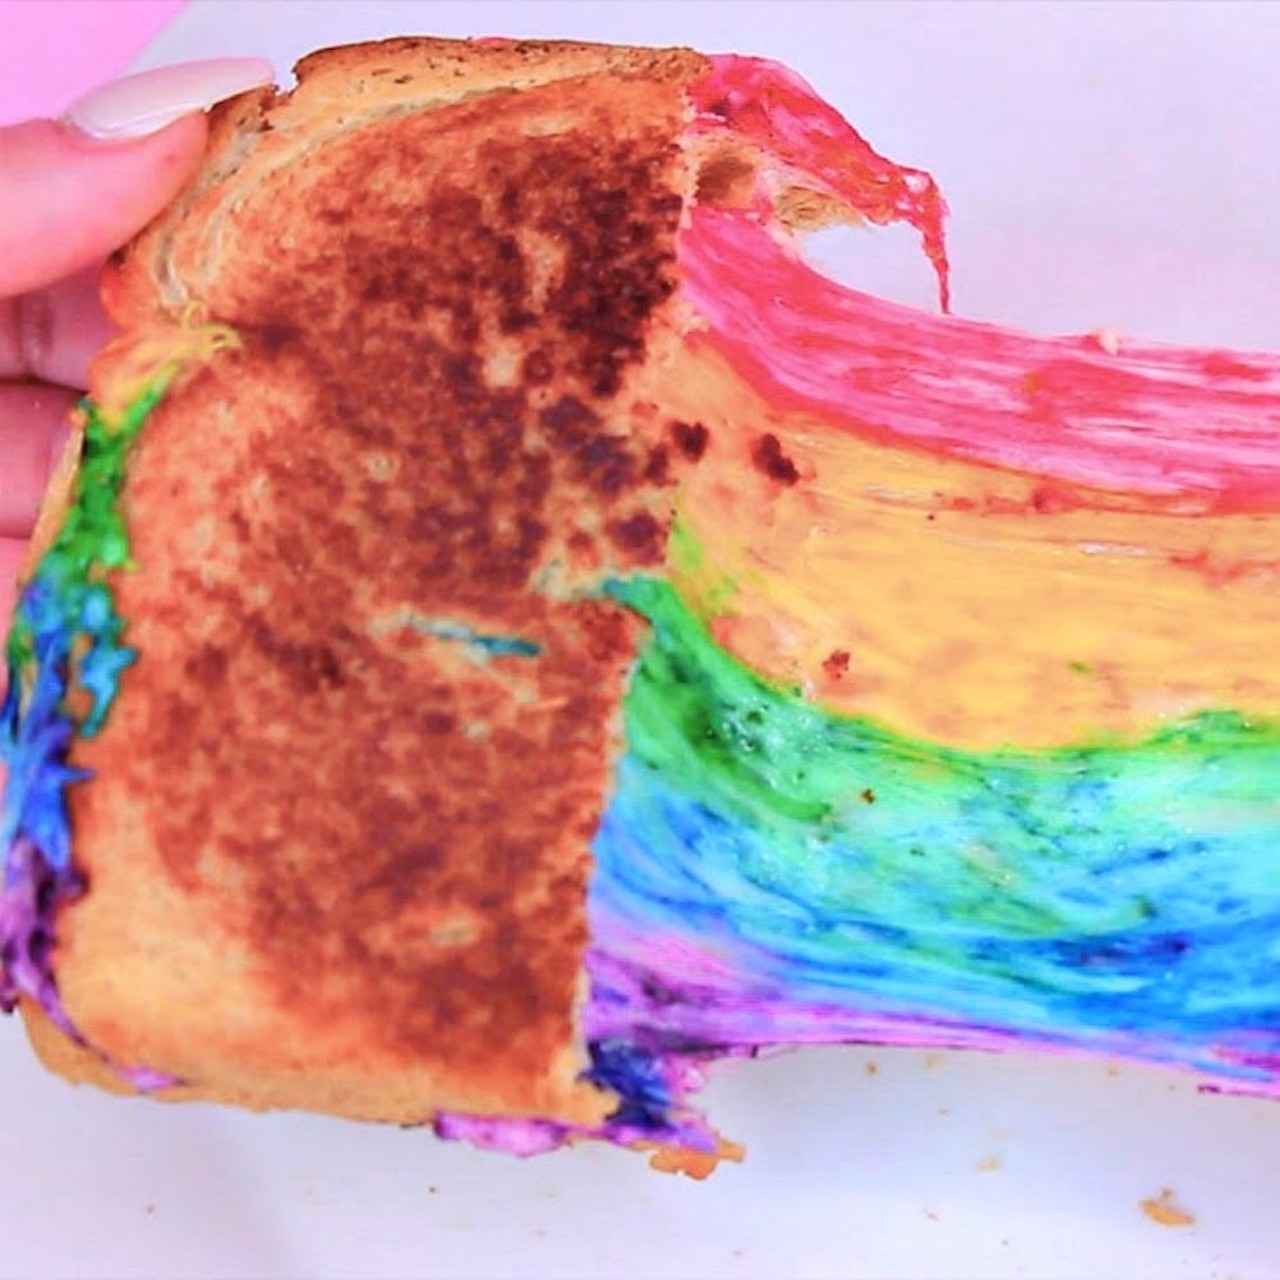 Rainbow Grilled Cheese
The Giddy Piggy's fourth grilled cheese option offers a colorful blend of mozzarella, Gouda and provolone.